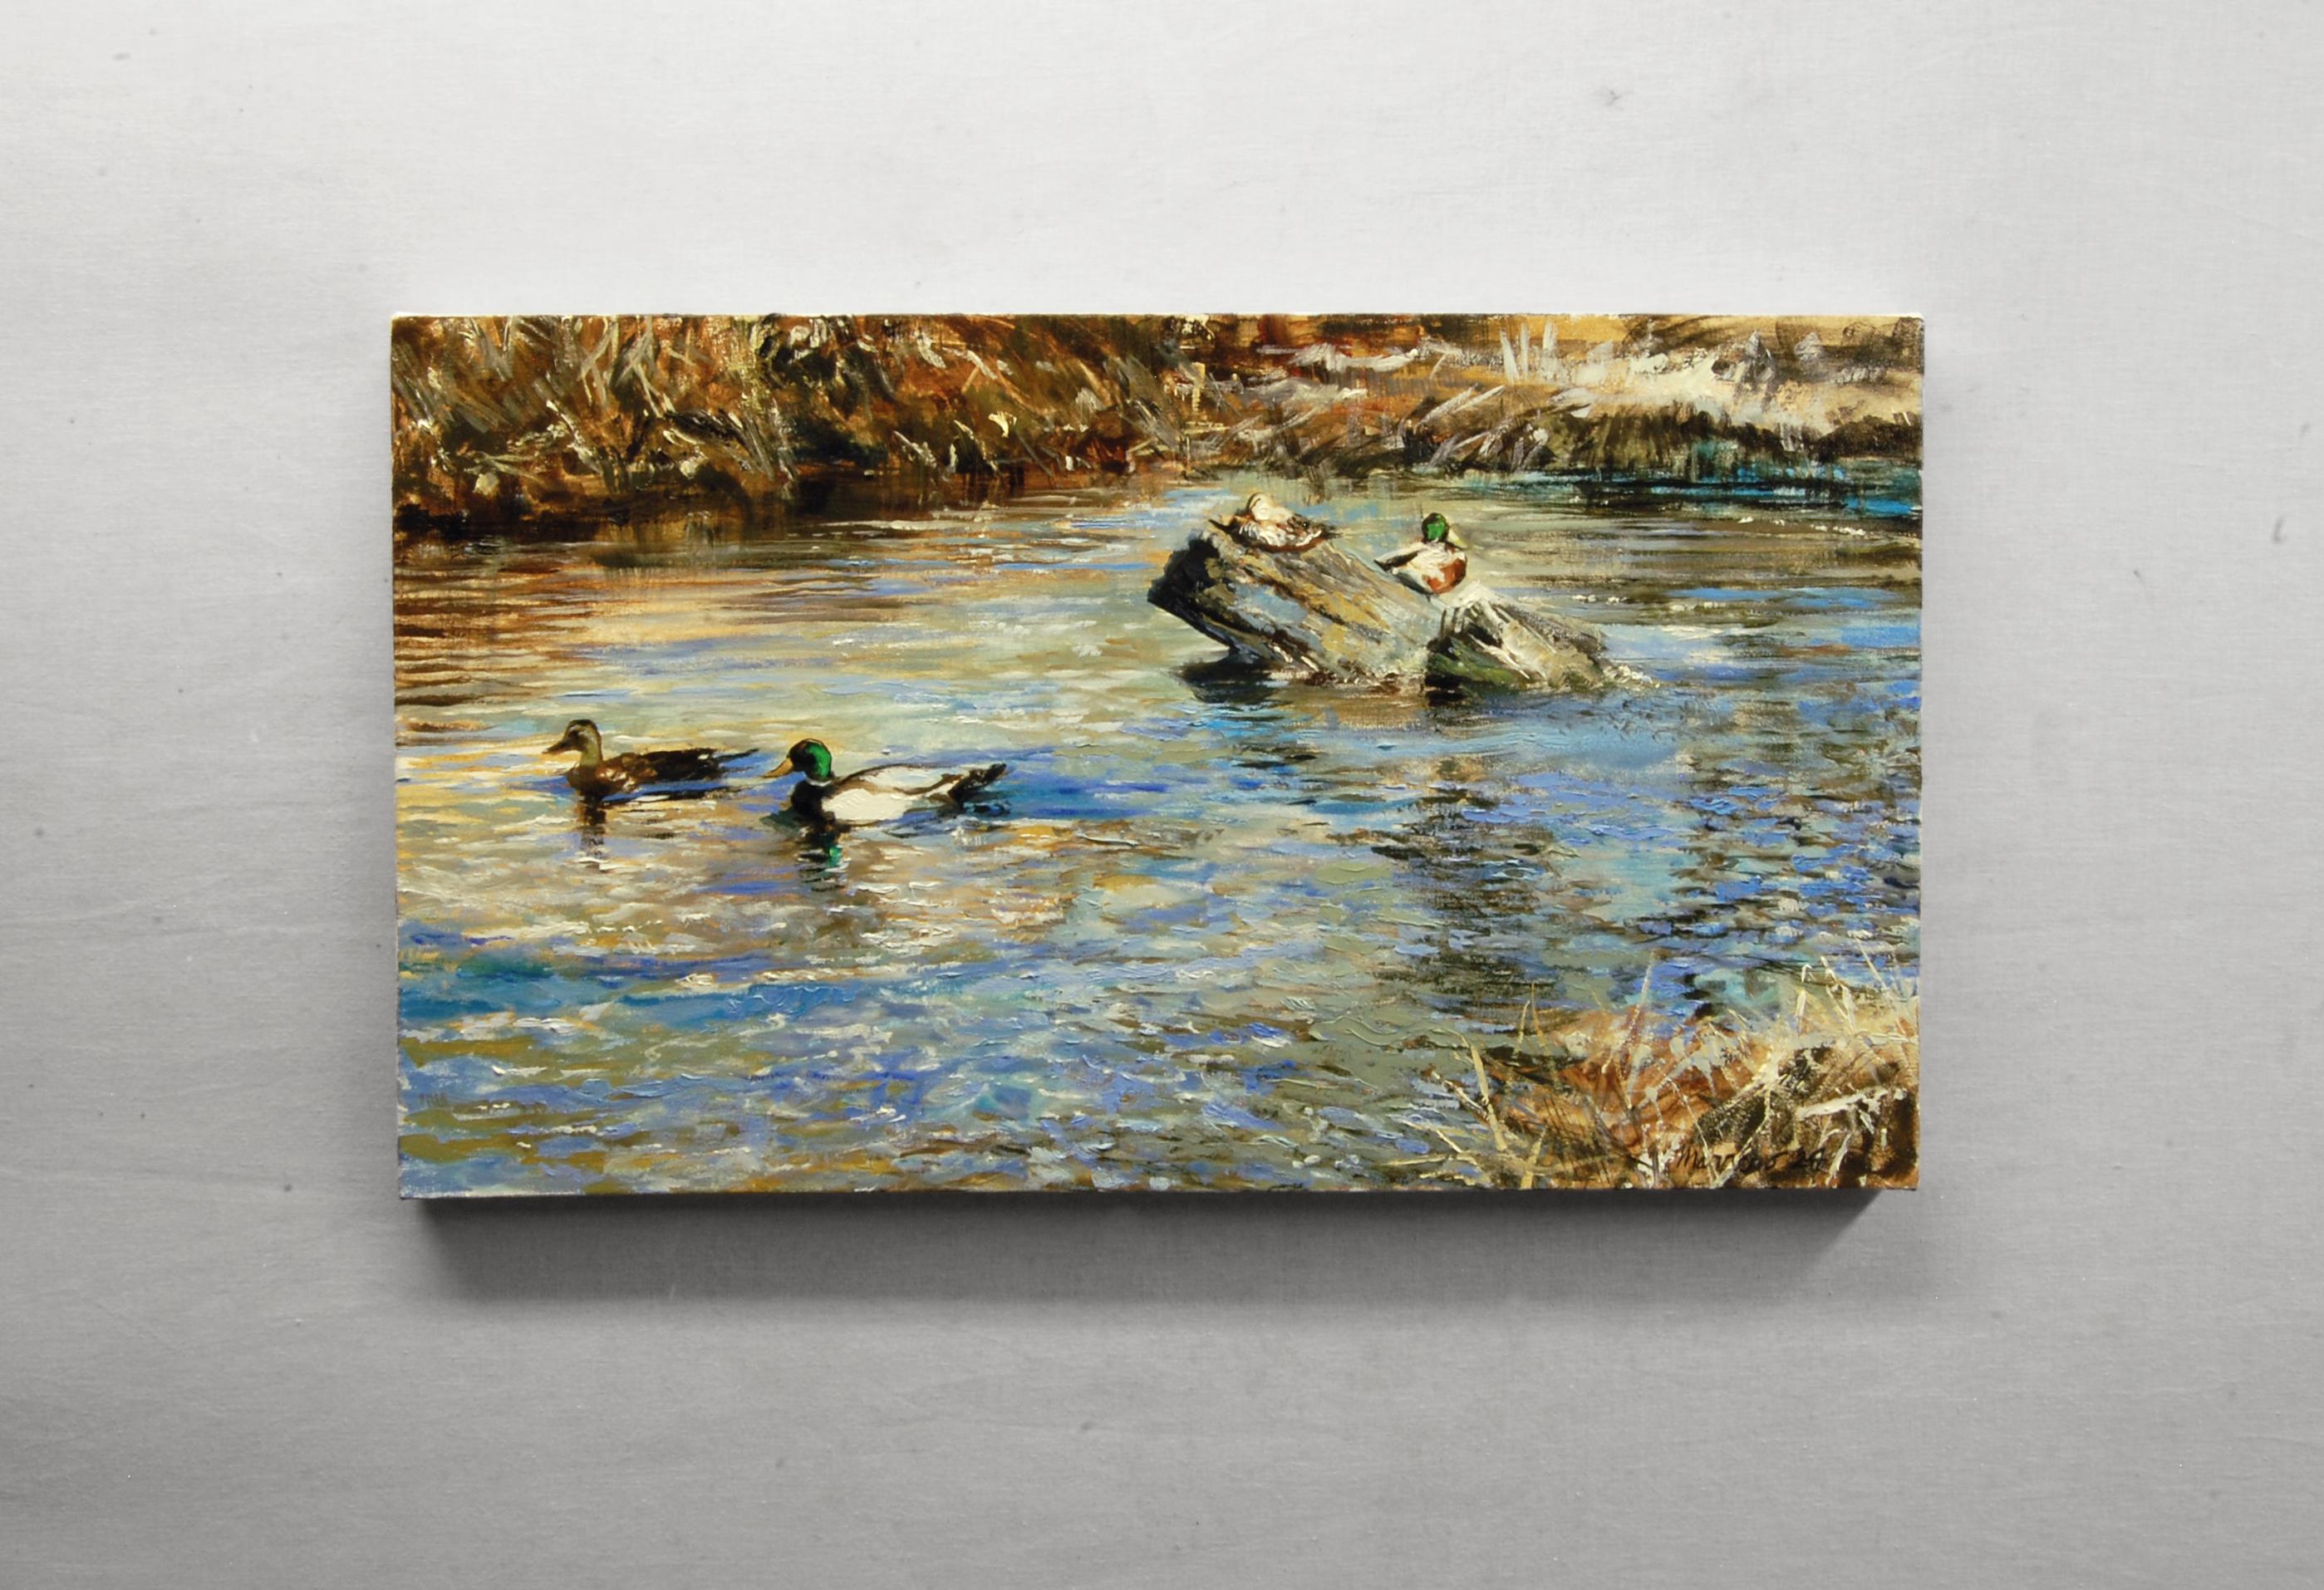 <p>Artist Comments<br>Mallard ducks cast their reflections on the swiftly moving water, with a pair gracefully gliding near a third one perched on a log. Dynamic brushwork and palette knife techniques capture the gentle ripple of the river. Rich,